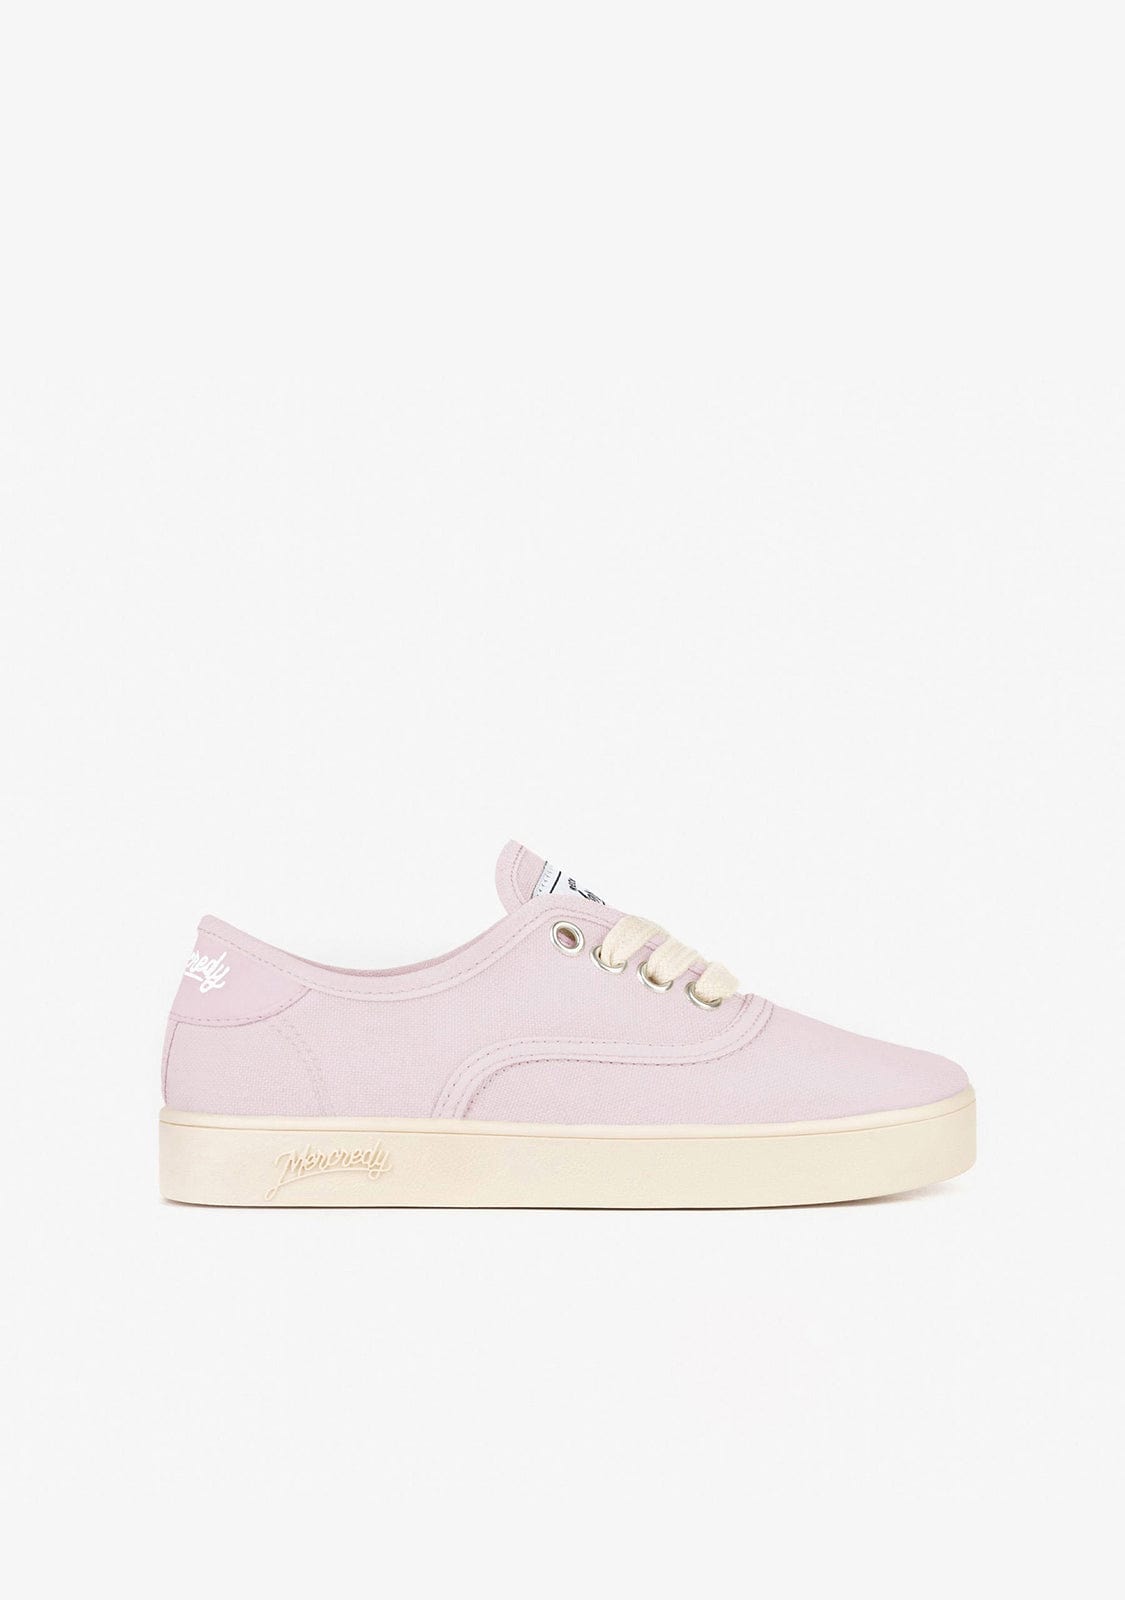 MERCREDY Shoes Pink Ecological Sneakers Mercredy